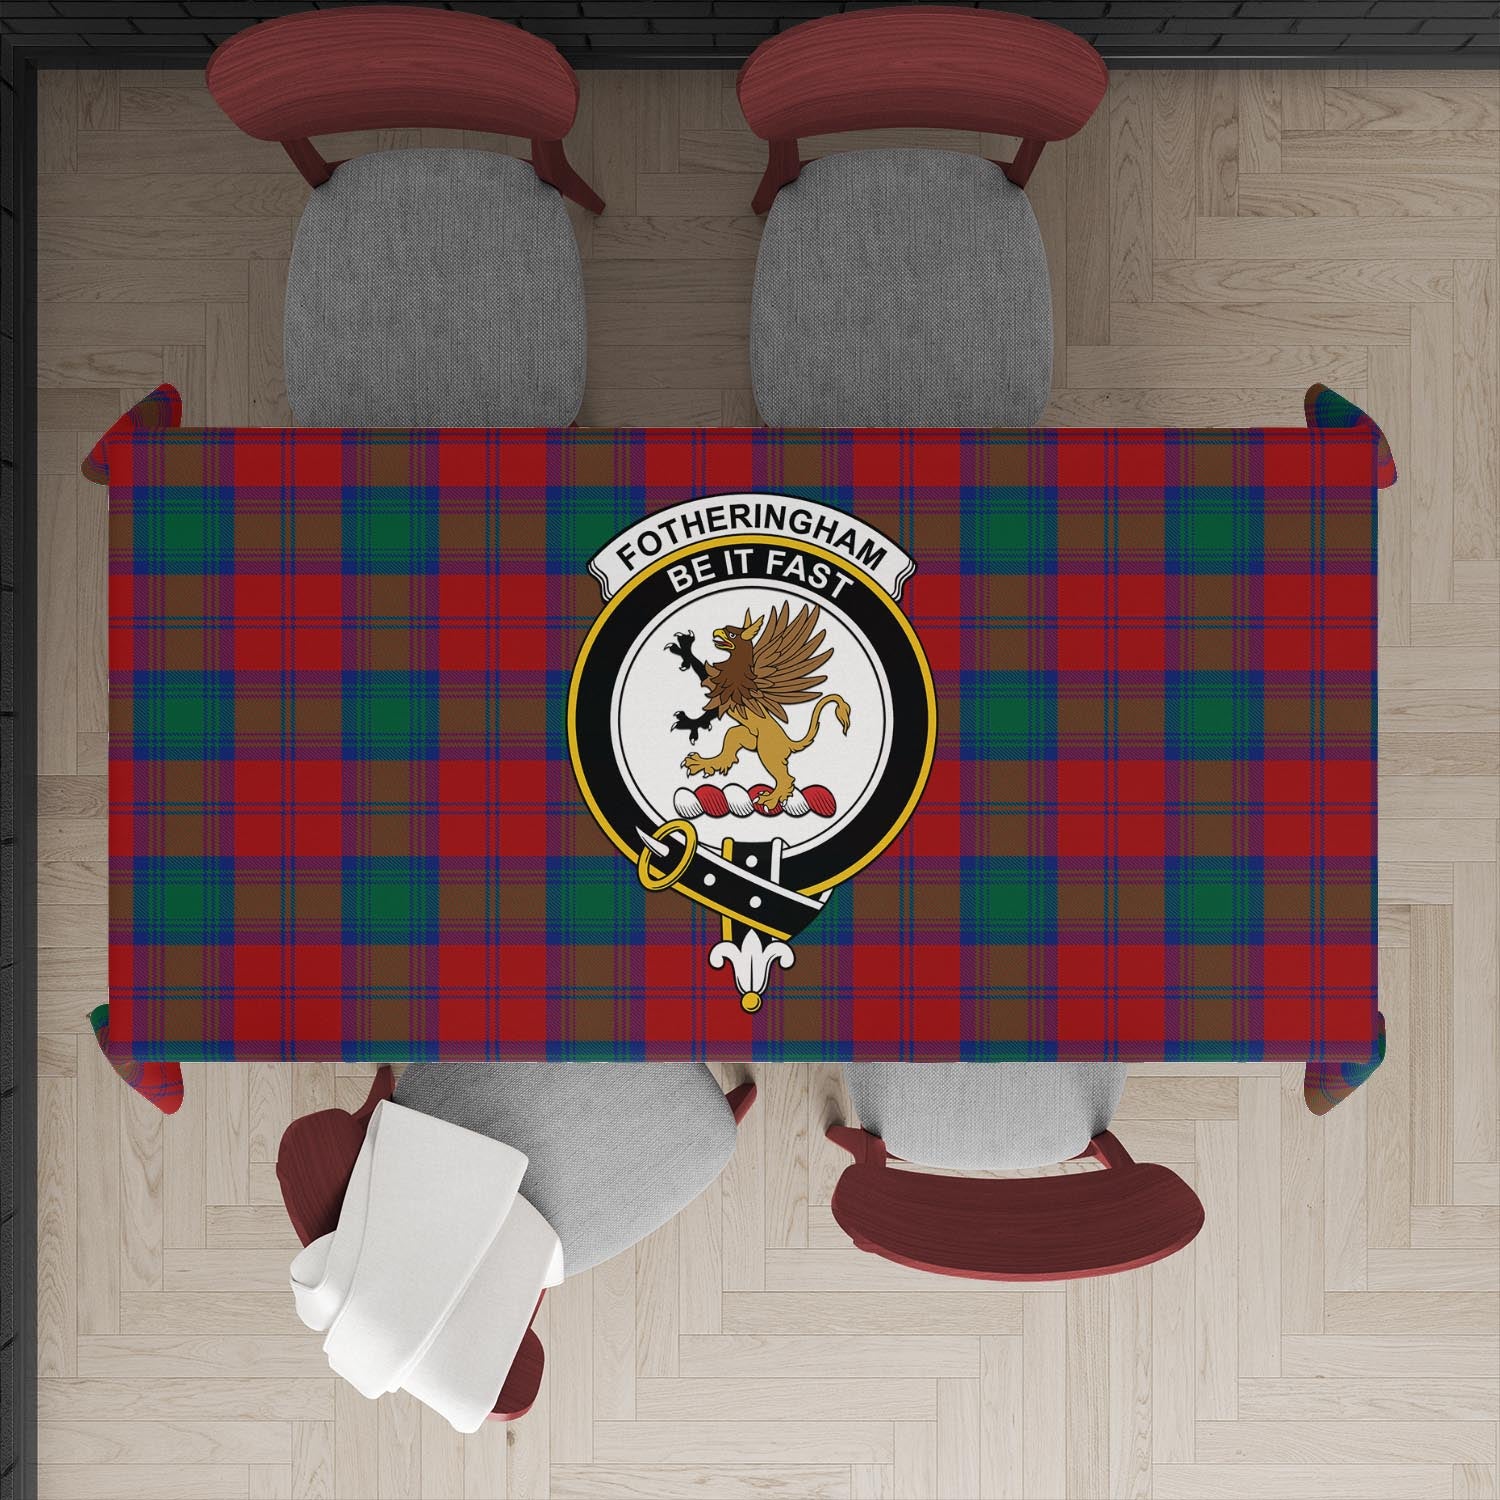 fotheringham-modern-tatan-tablecloth-with-family-crest